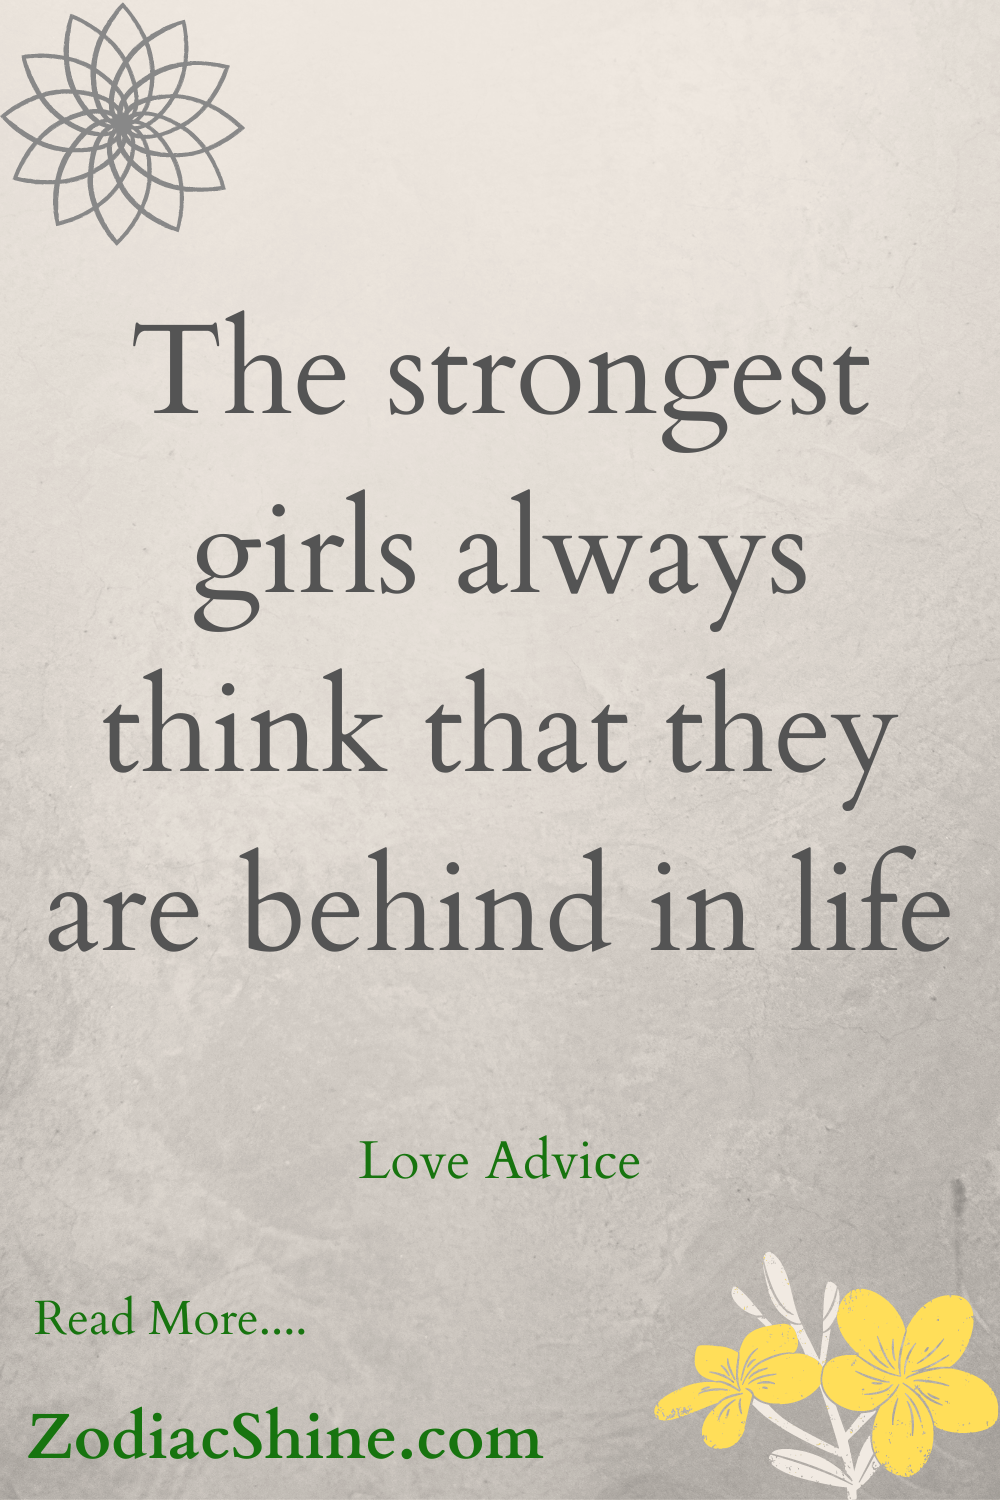 The strongest girls always think that they are behind in life